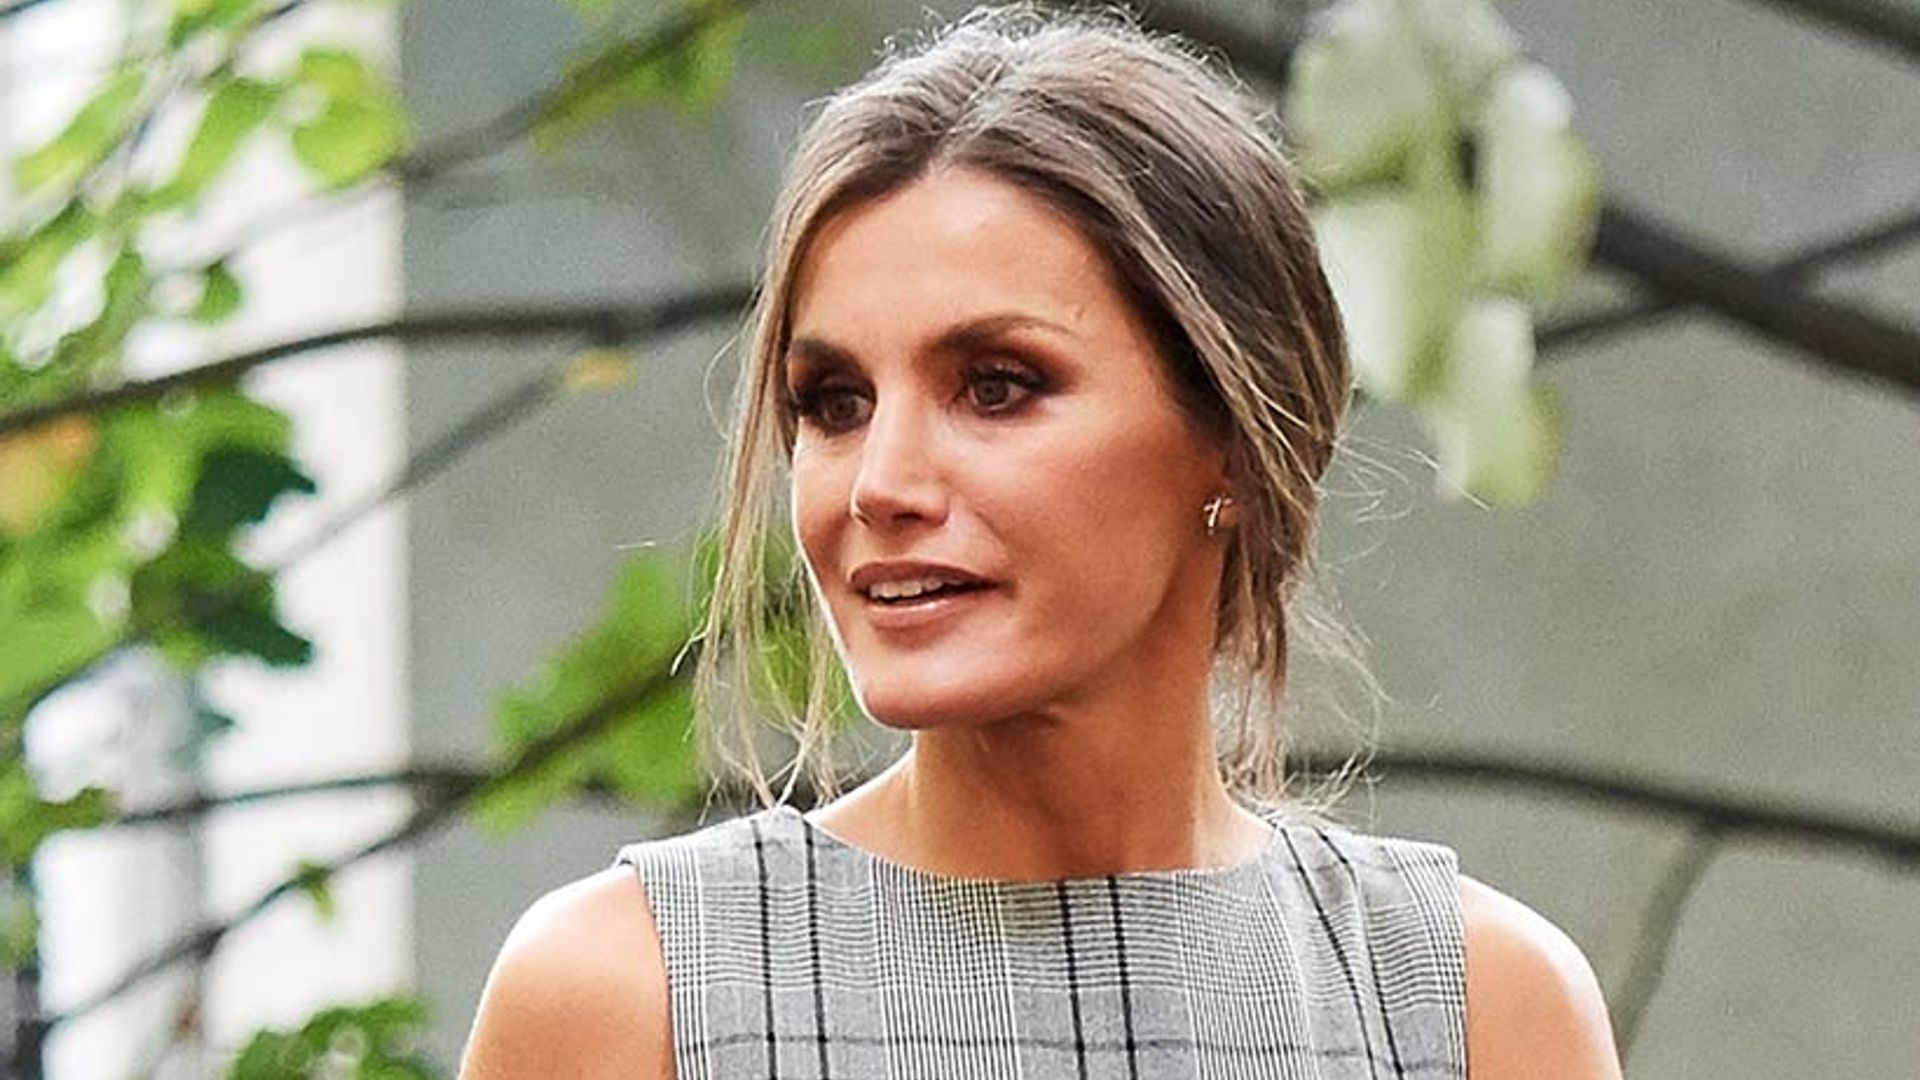 Queen Letizia just wore a £25 Zara checked top and it's so chic